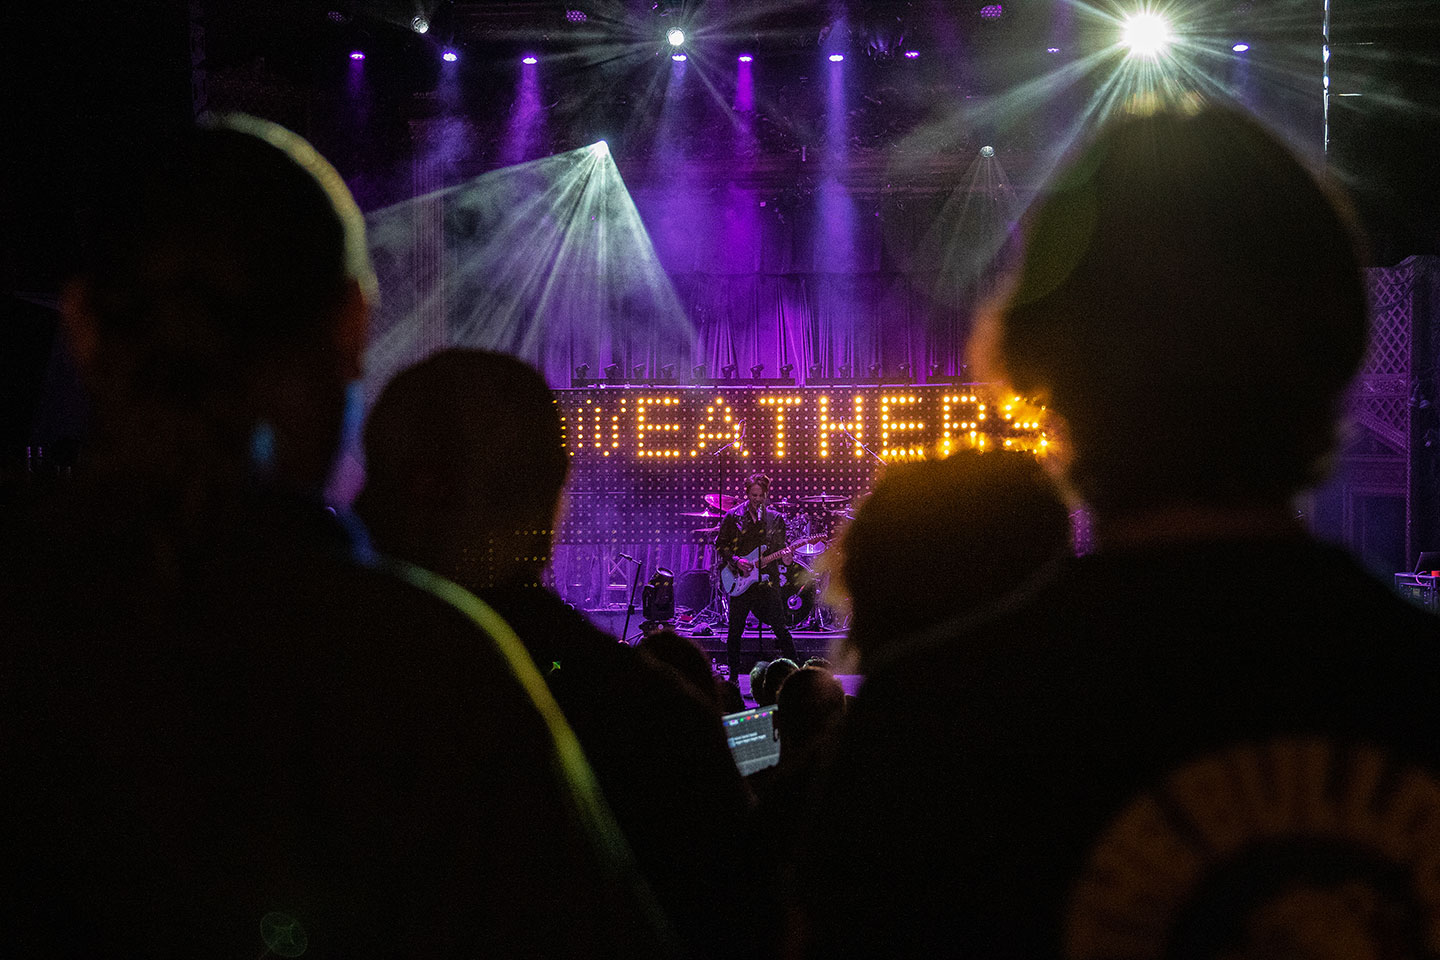 Interview with the band Weathers